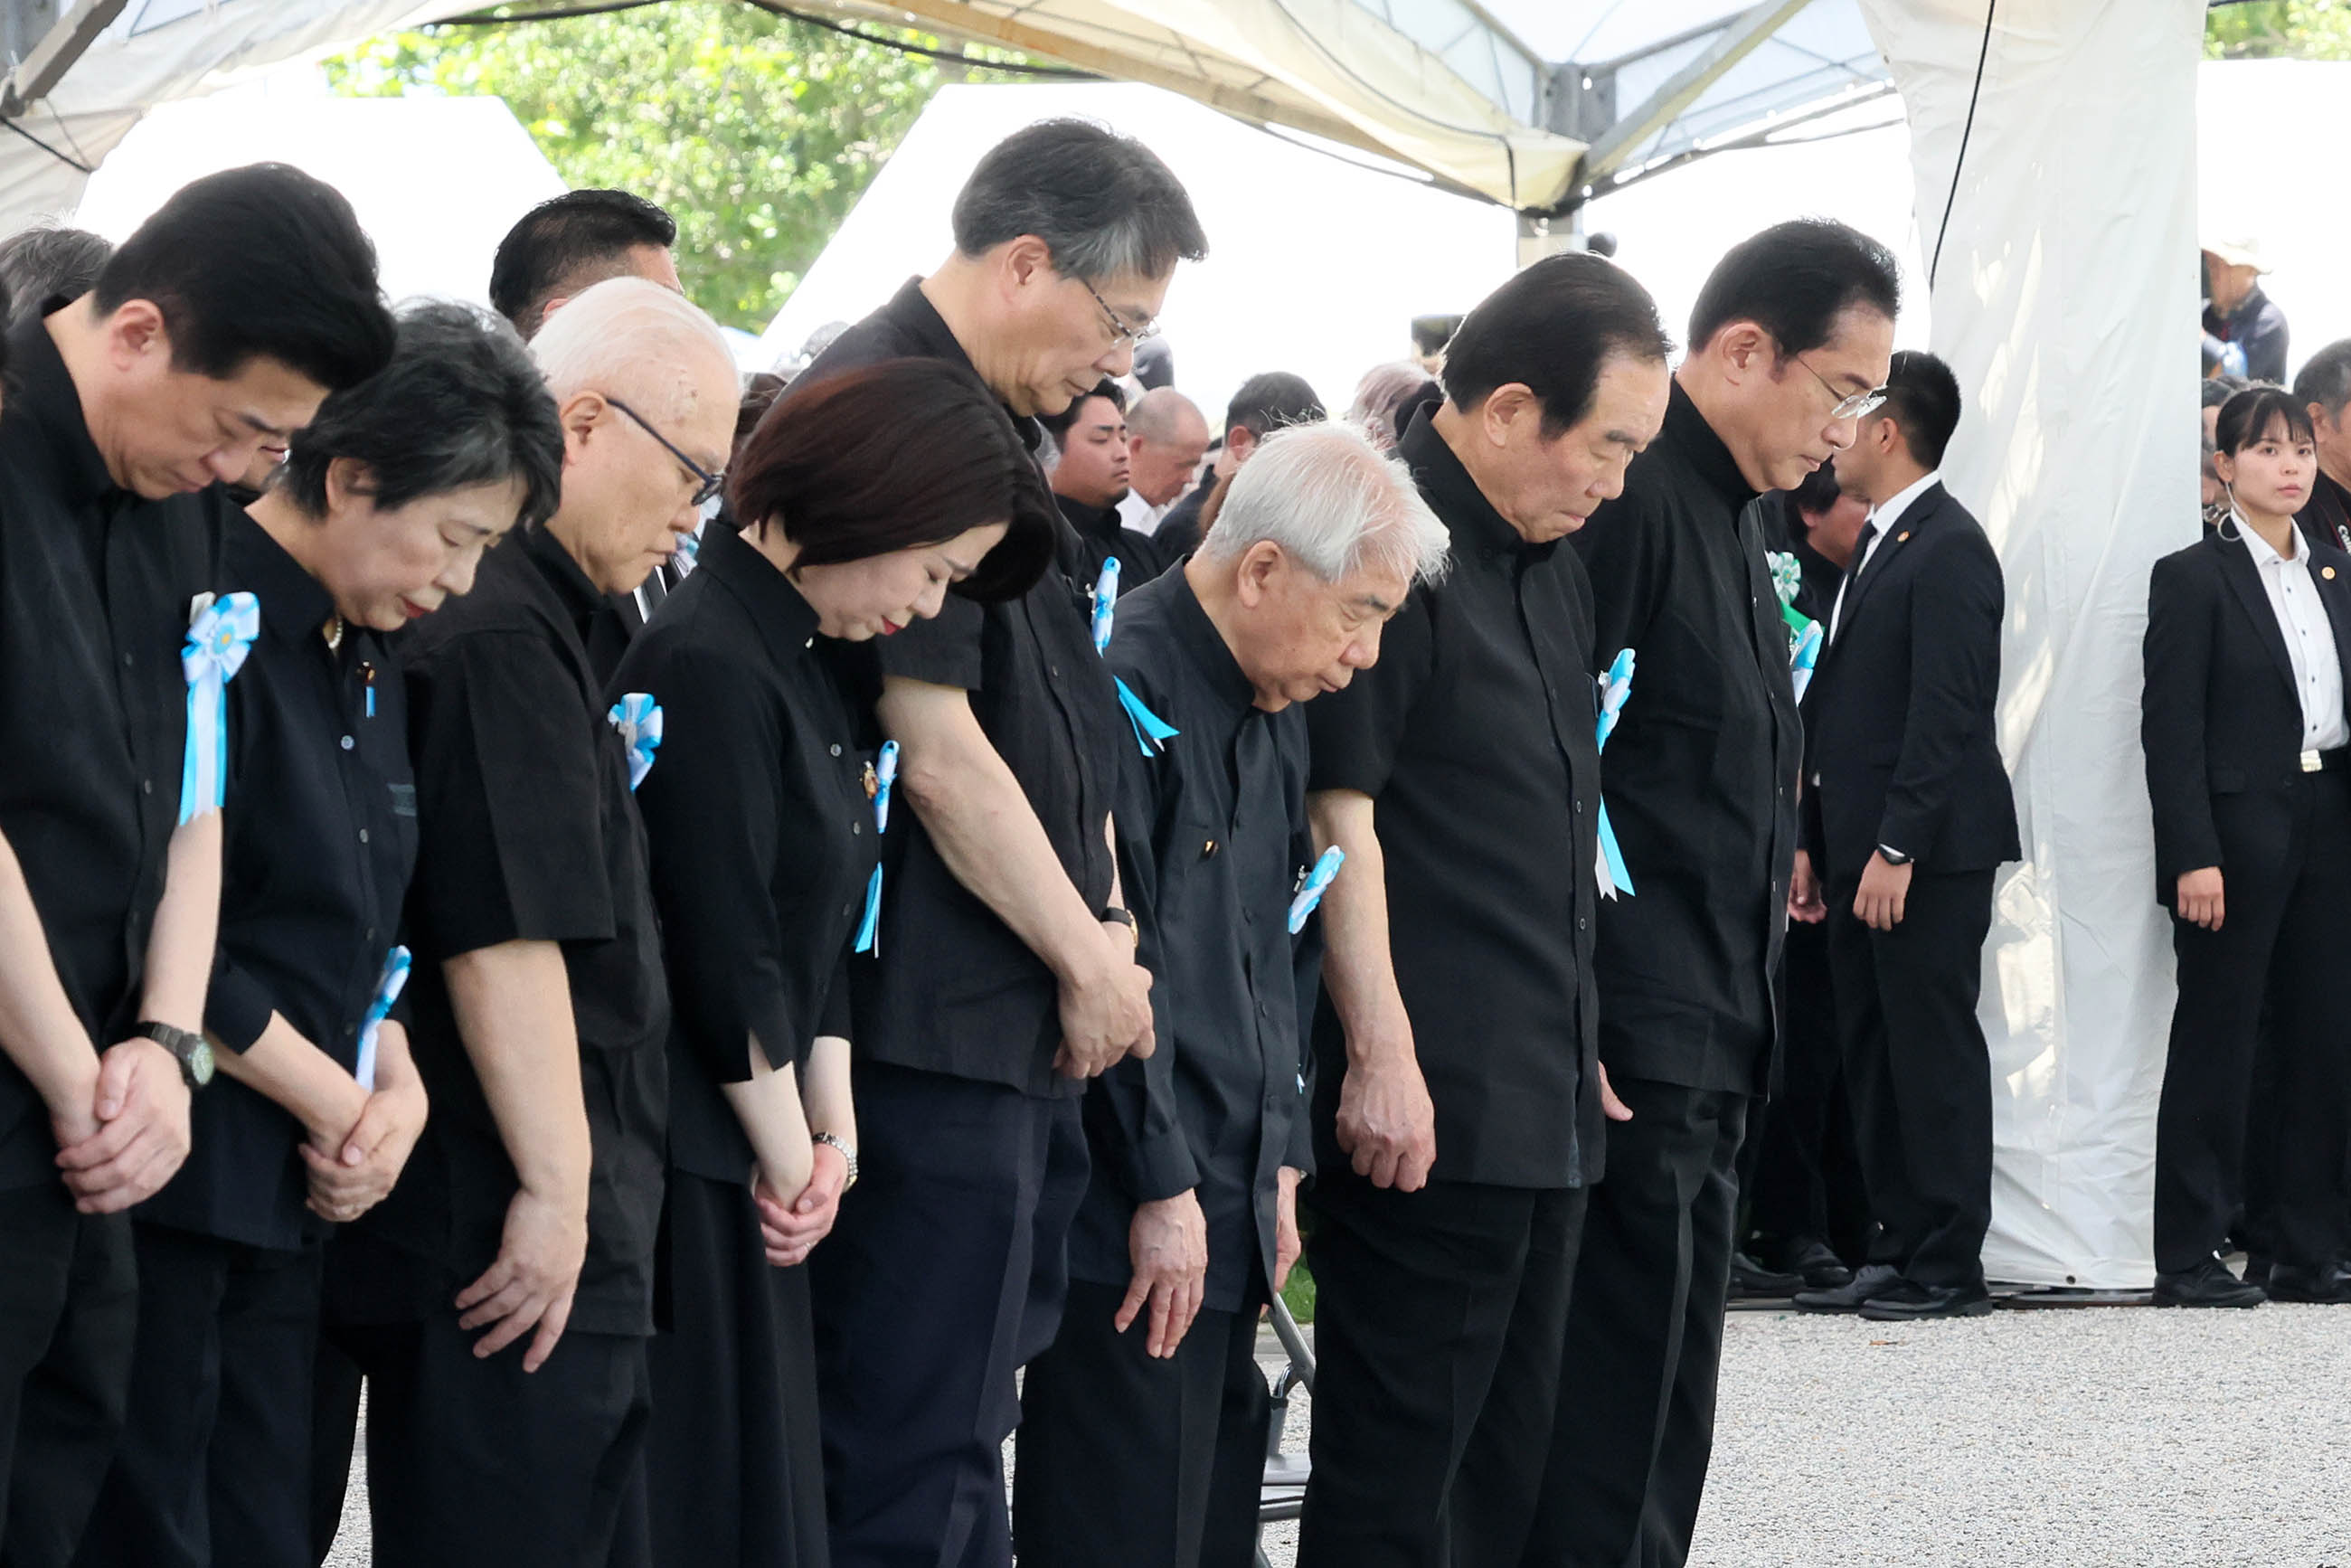 Photograph of the Prime Minister observing a moment of silence at the Memorial Ceremony to Commemorate the Fallen on the 79th Anniversary of the End of the Battle of Okinawa (1)